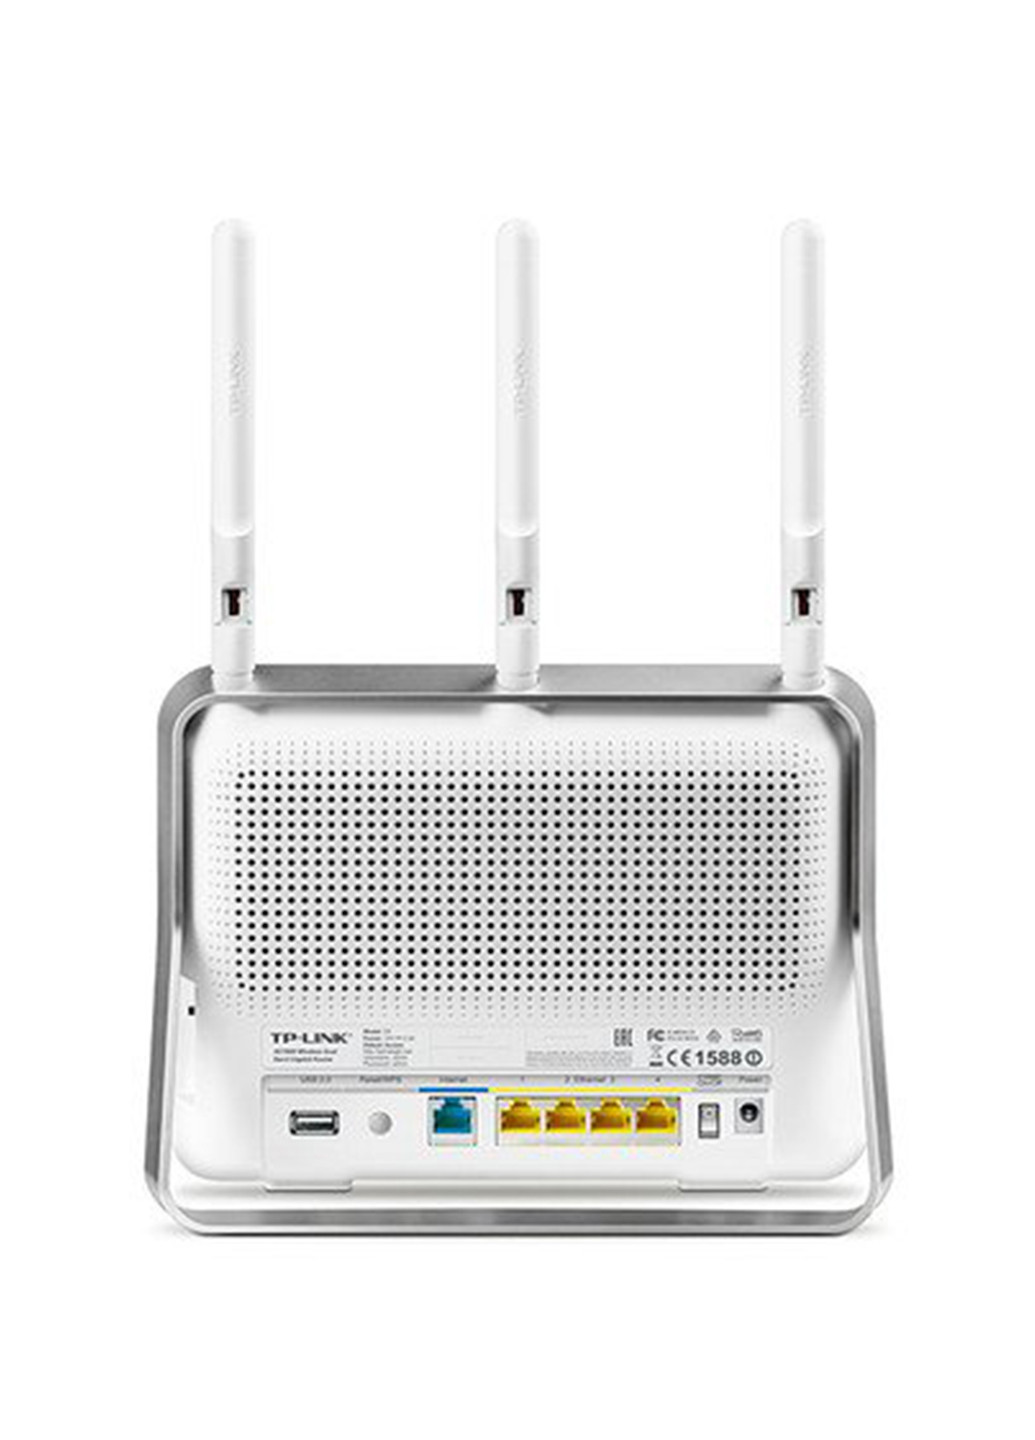 Маршрутизатор ARCHER C9 TP-Link маршрутизатор tp-link archer c9 (135800584)